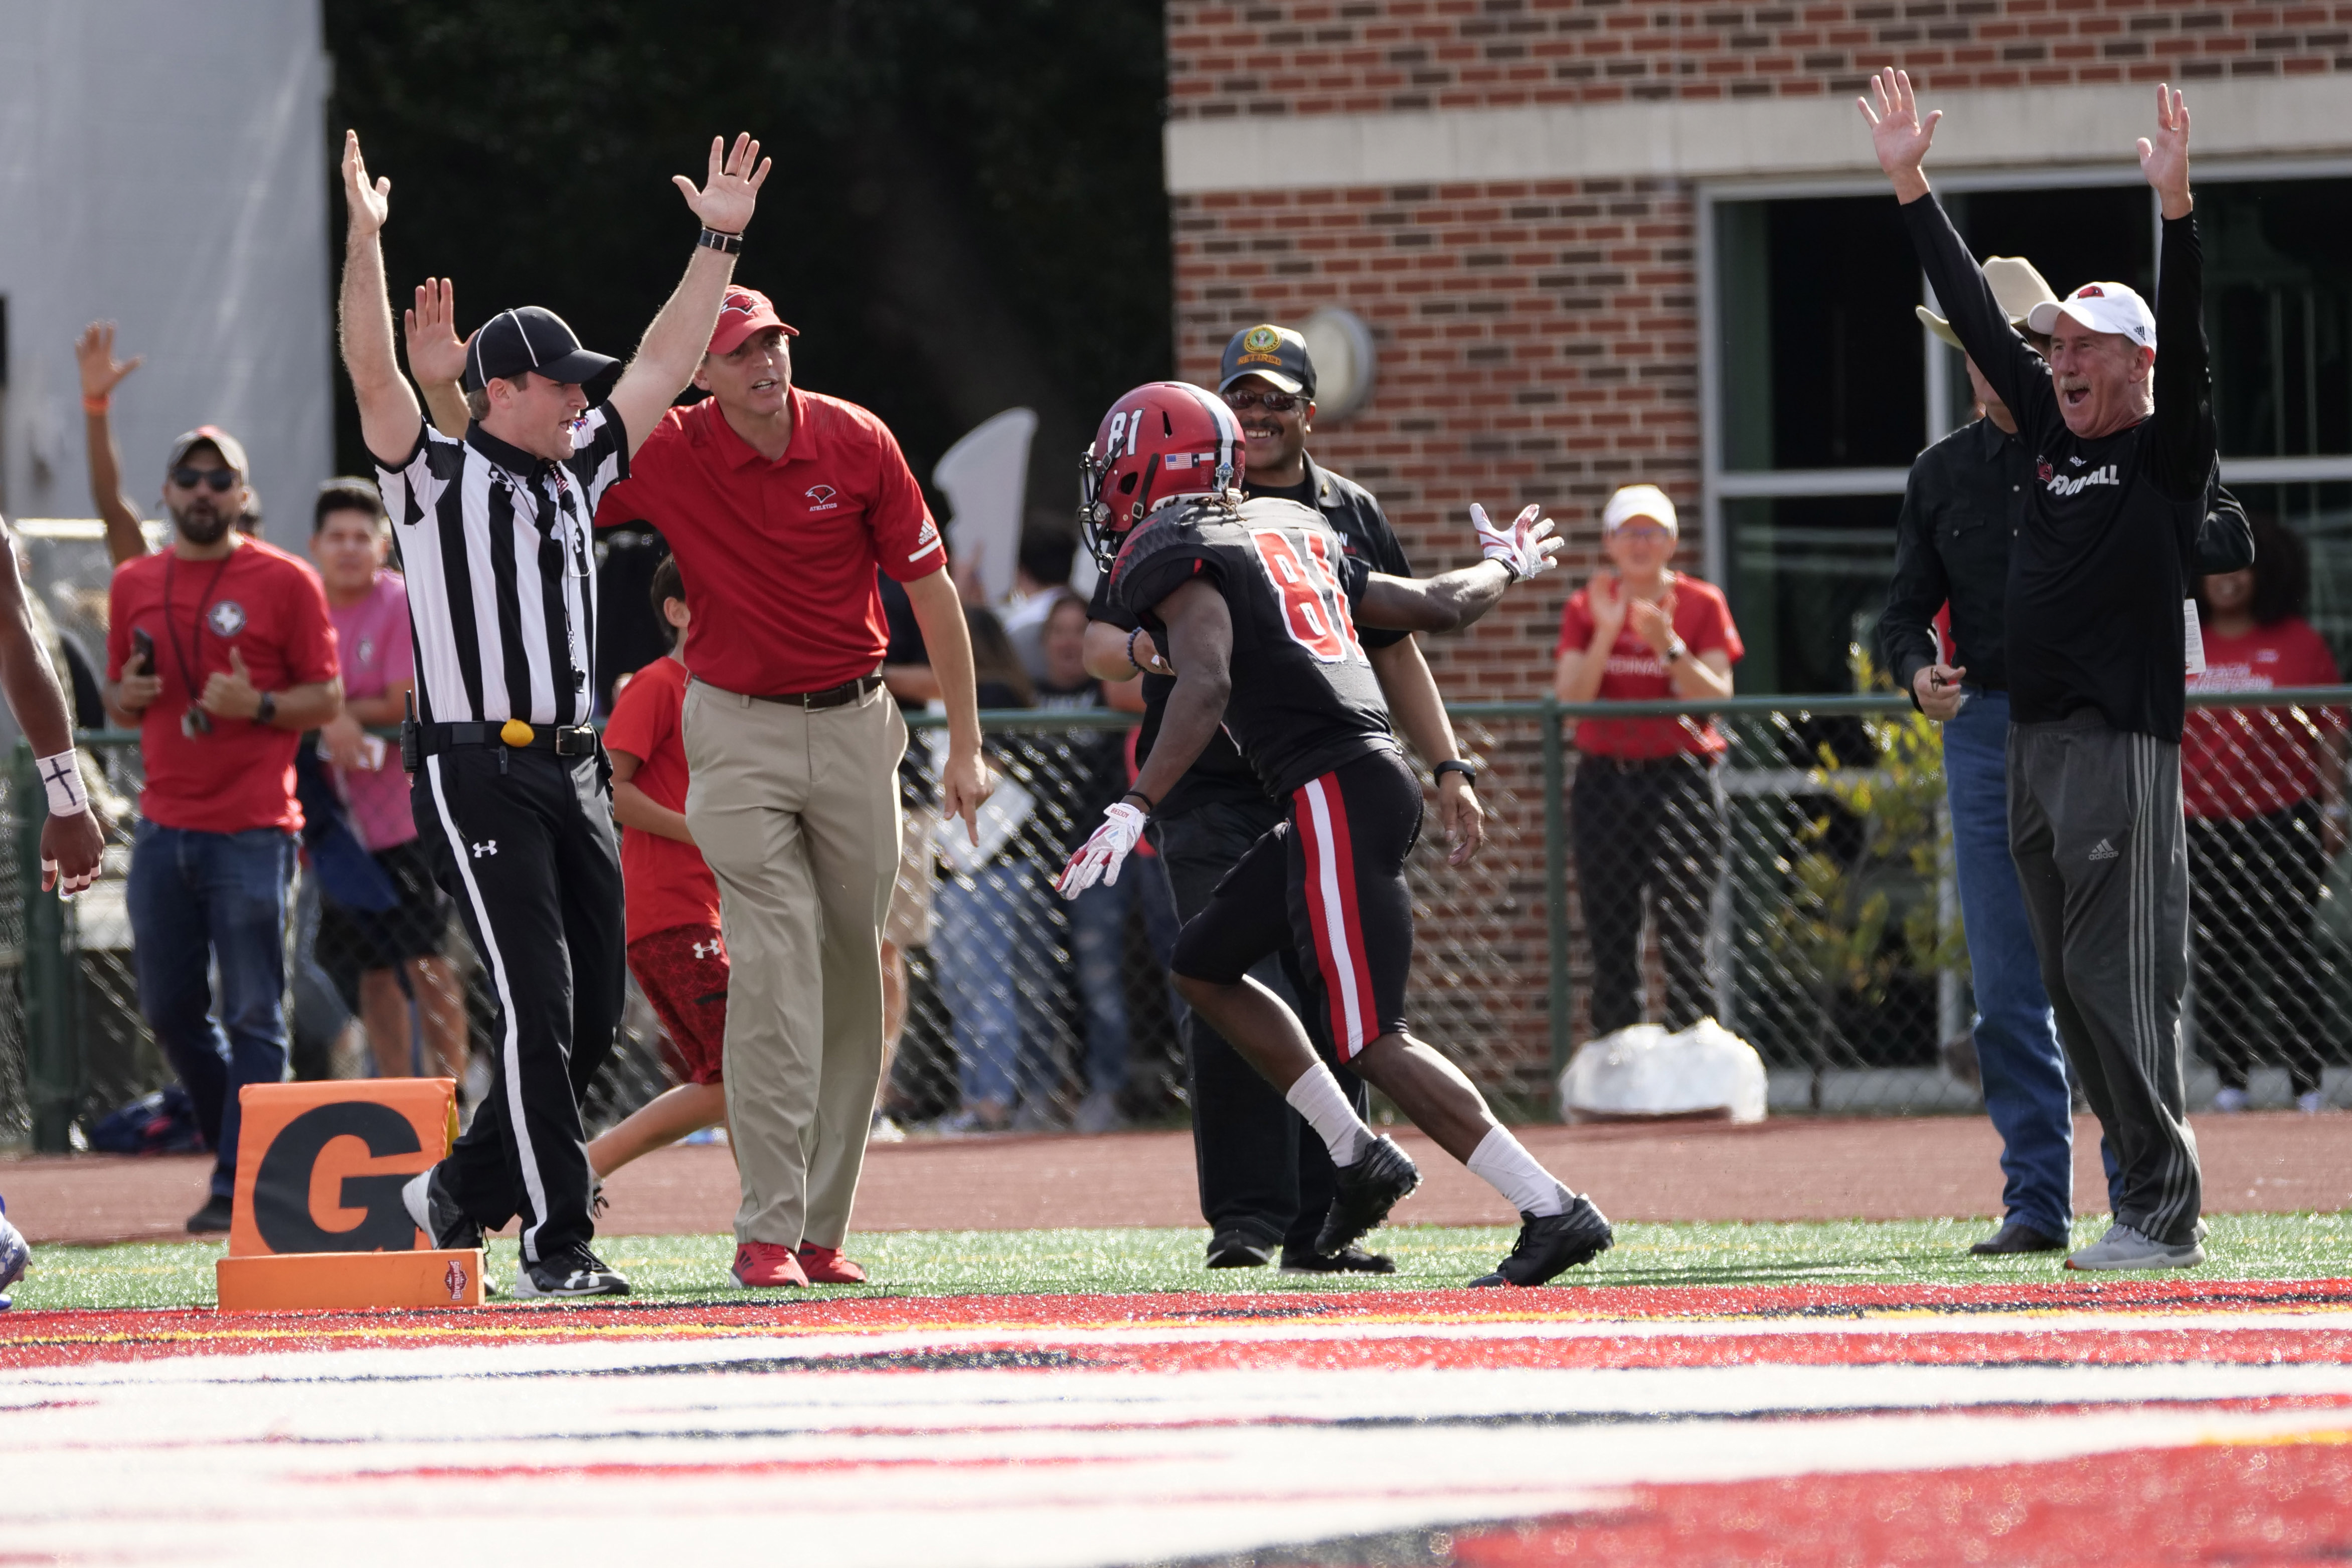 UIW Athletics implements new bag check policy - University of the Incarnate  Word Athletics